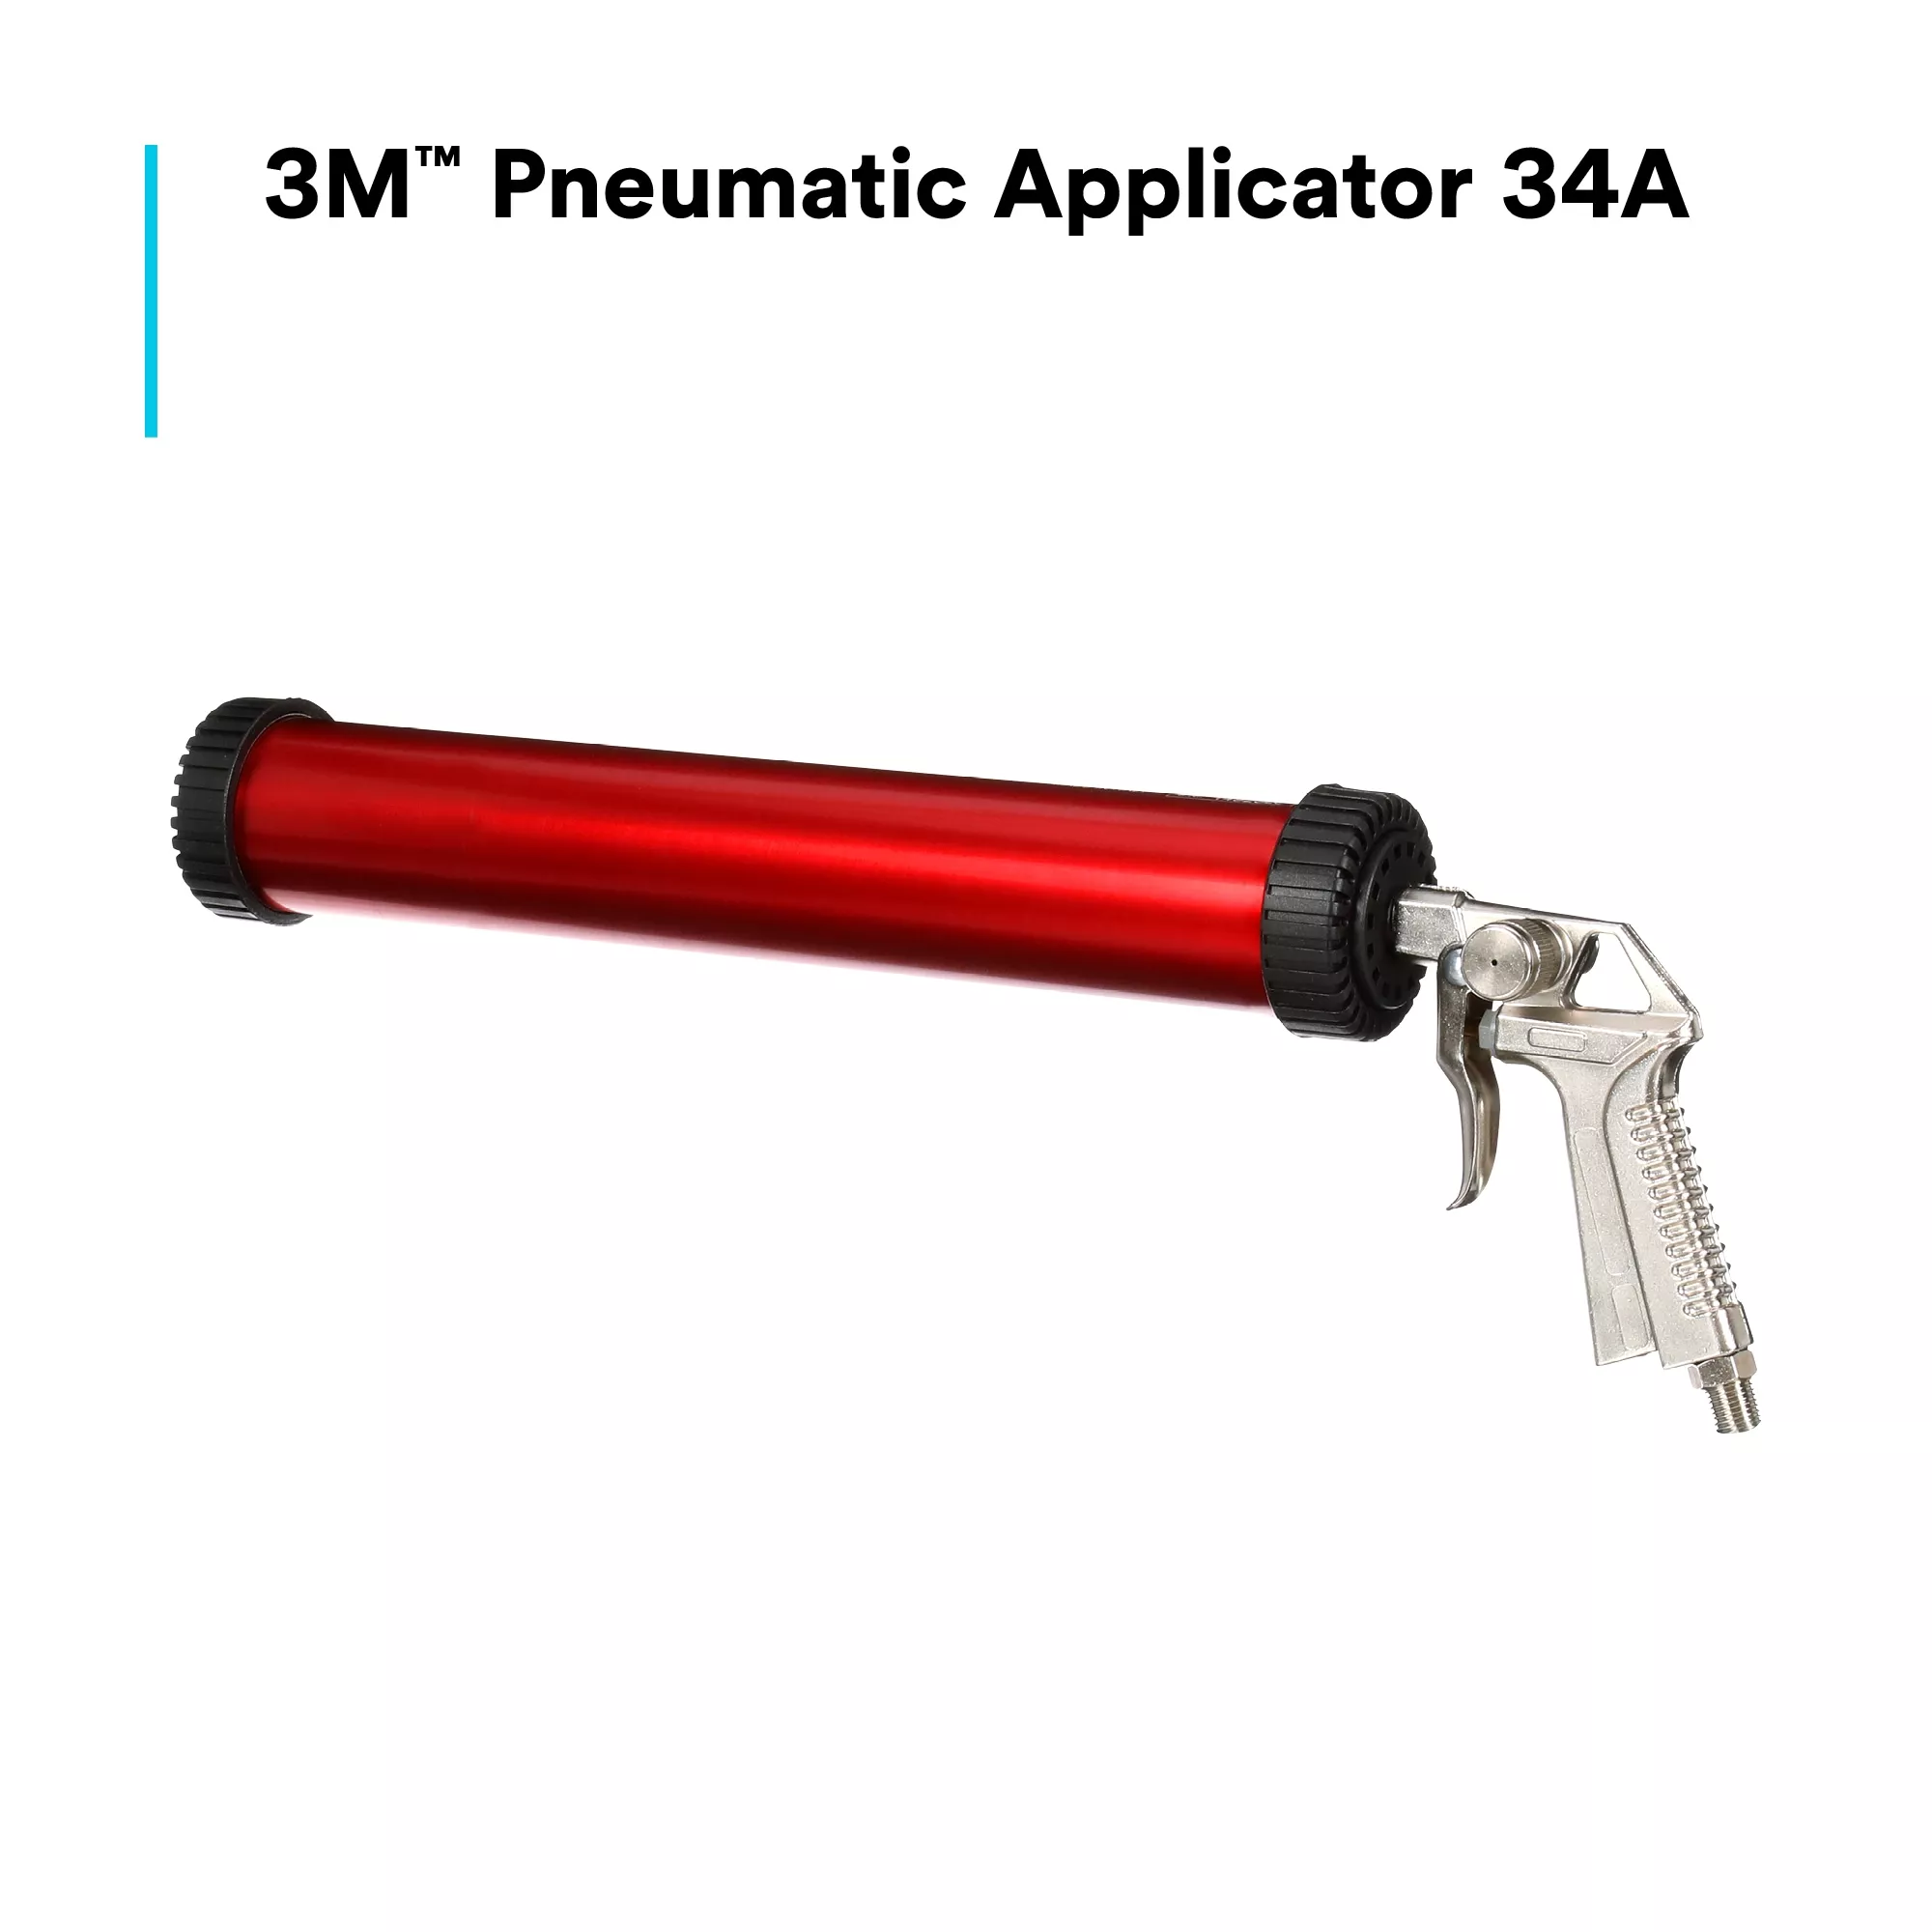 Product Number 34A | 3M™ Pneumatic Applicator 34A